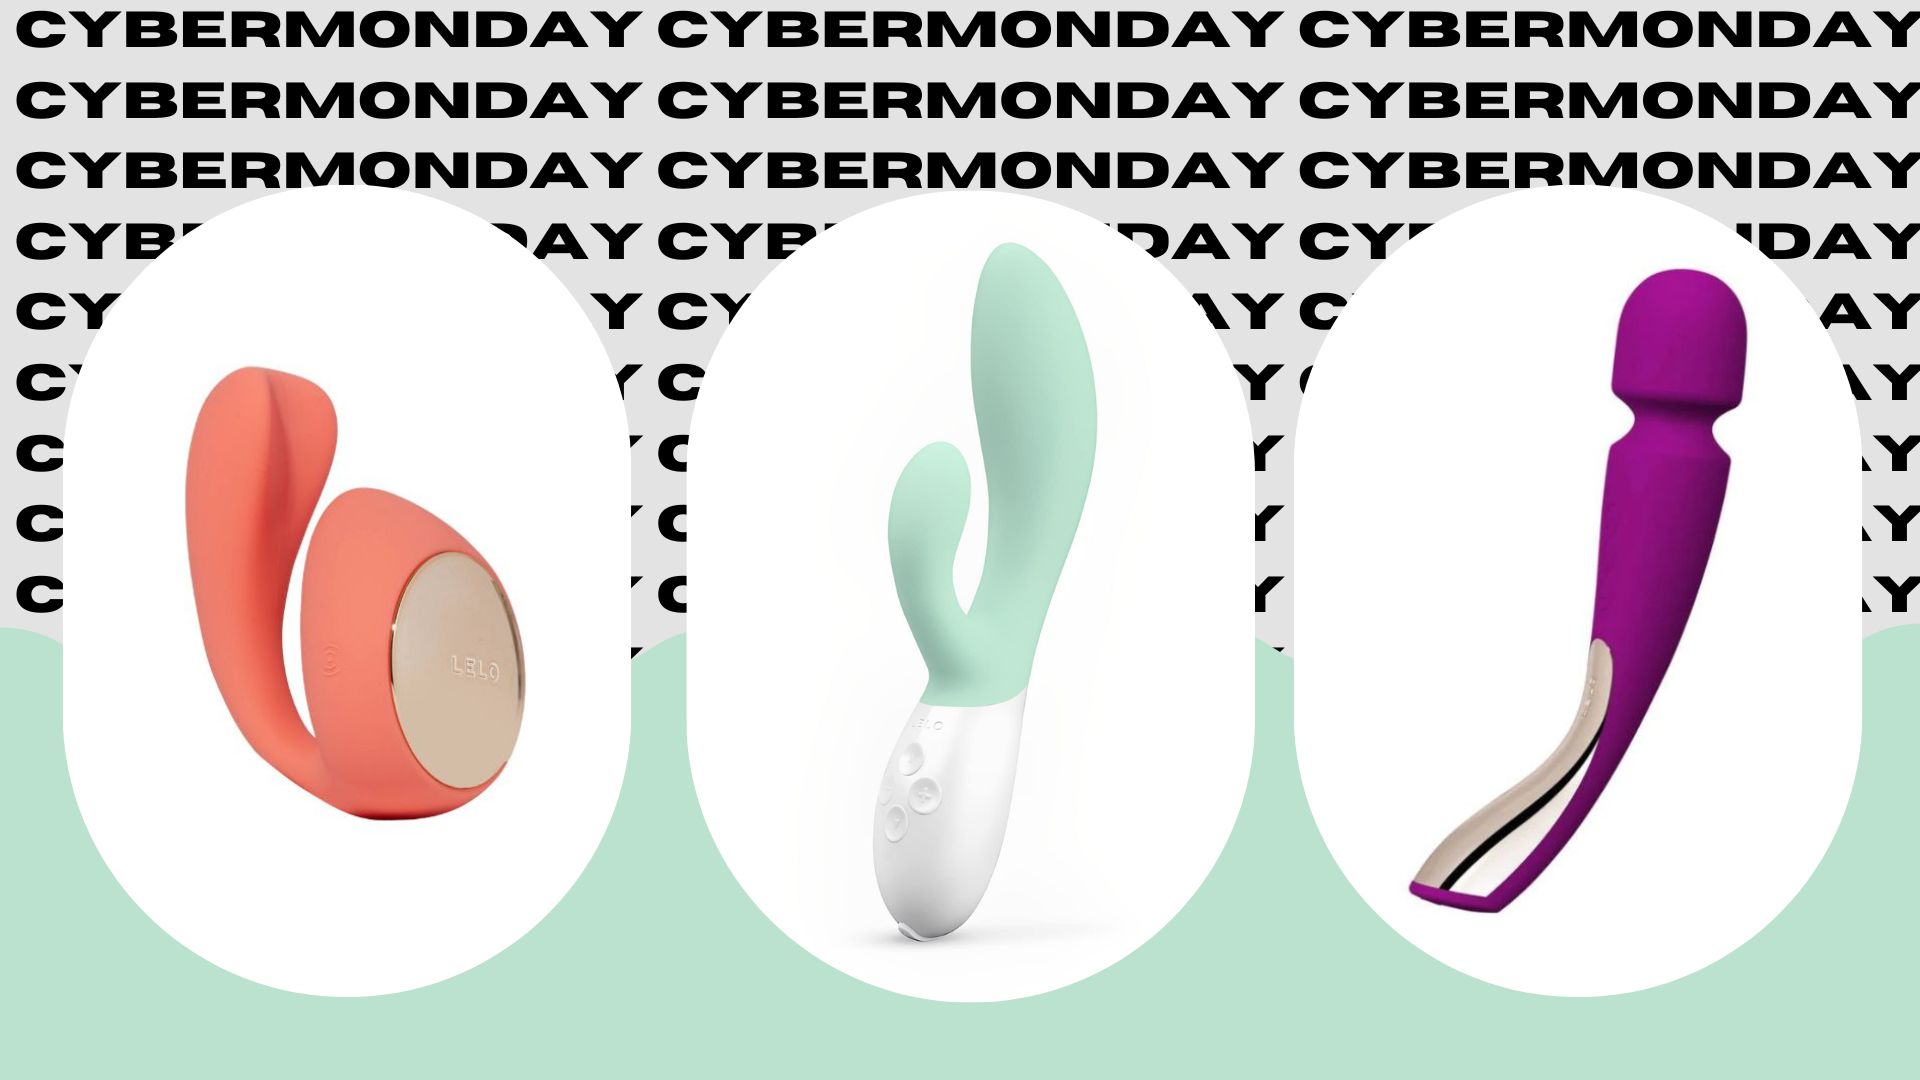 Early Cyber Monday sex toy deals: 50% off Adam & Eve